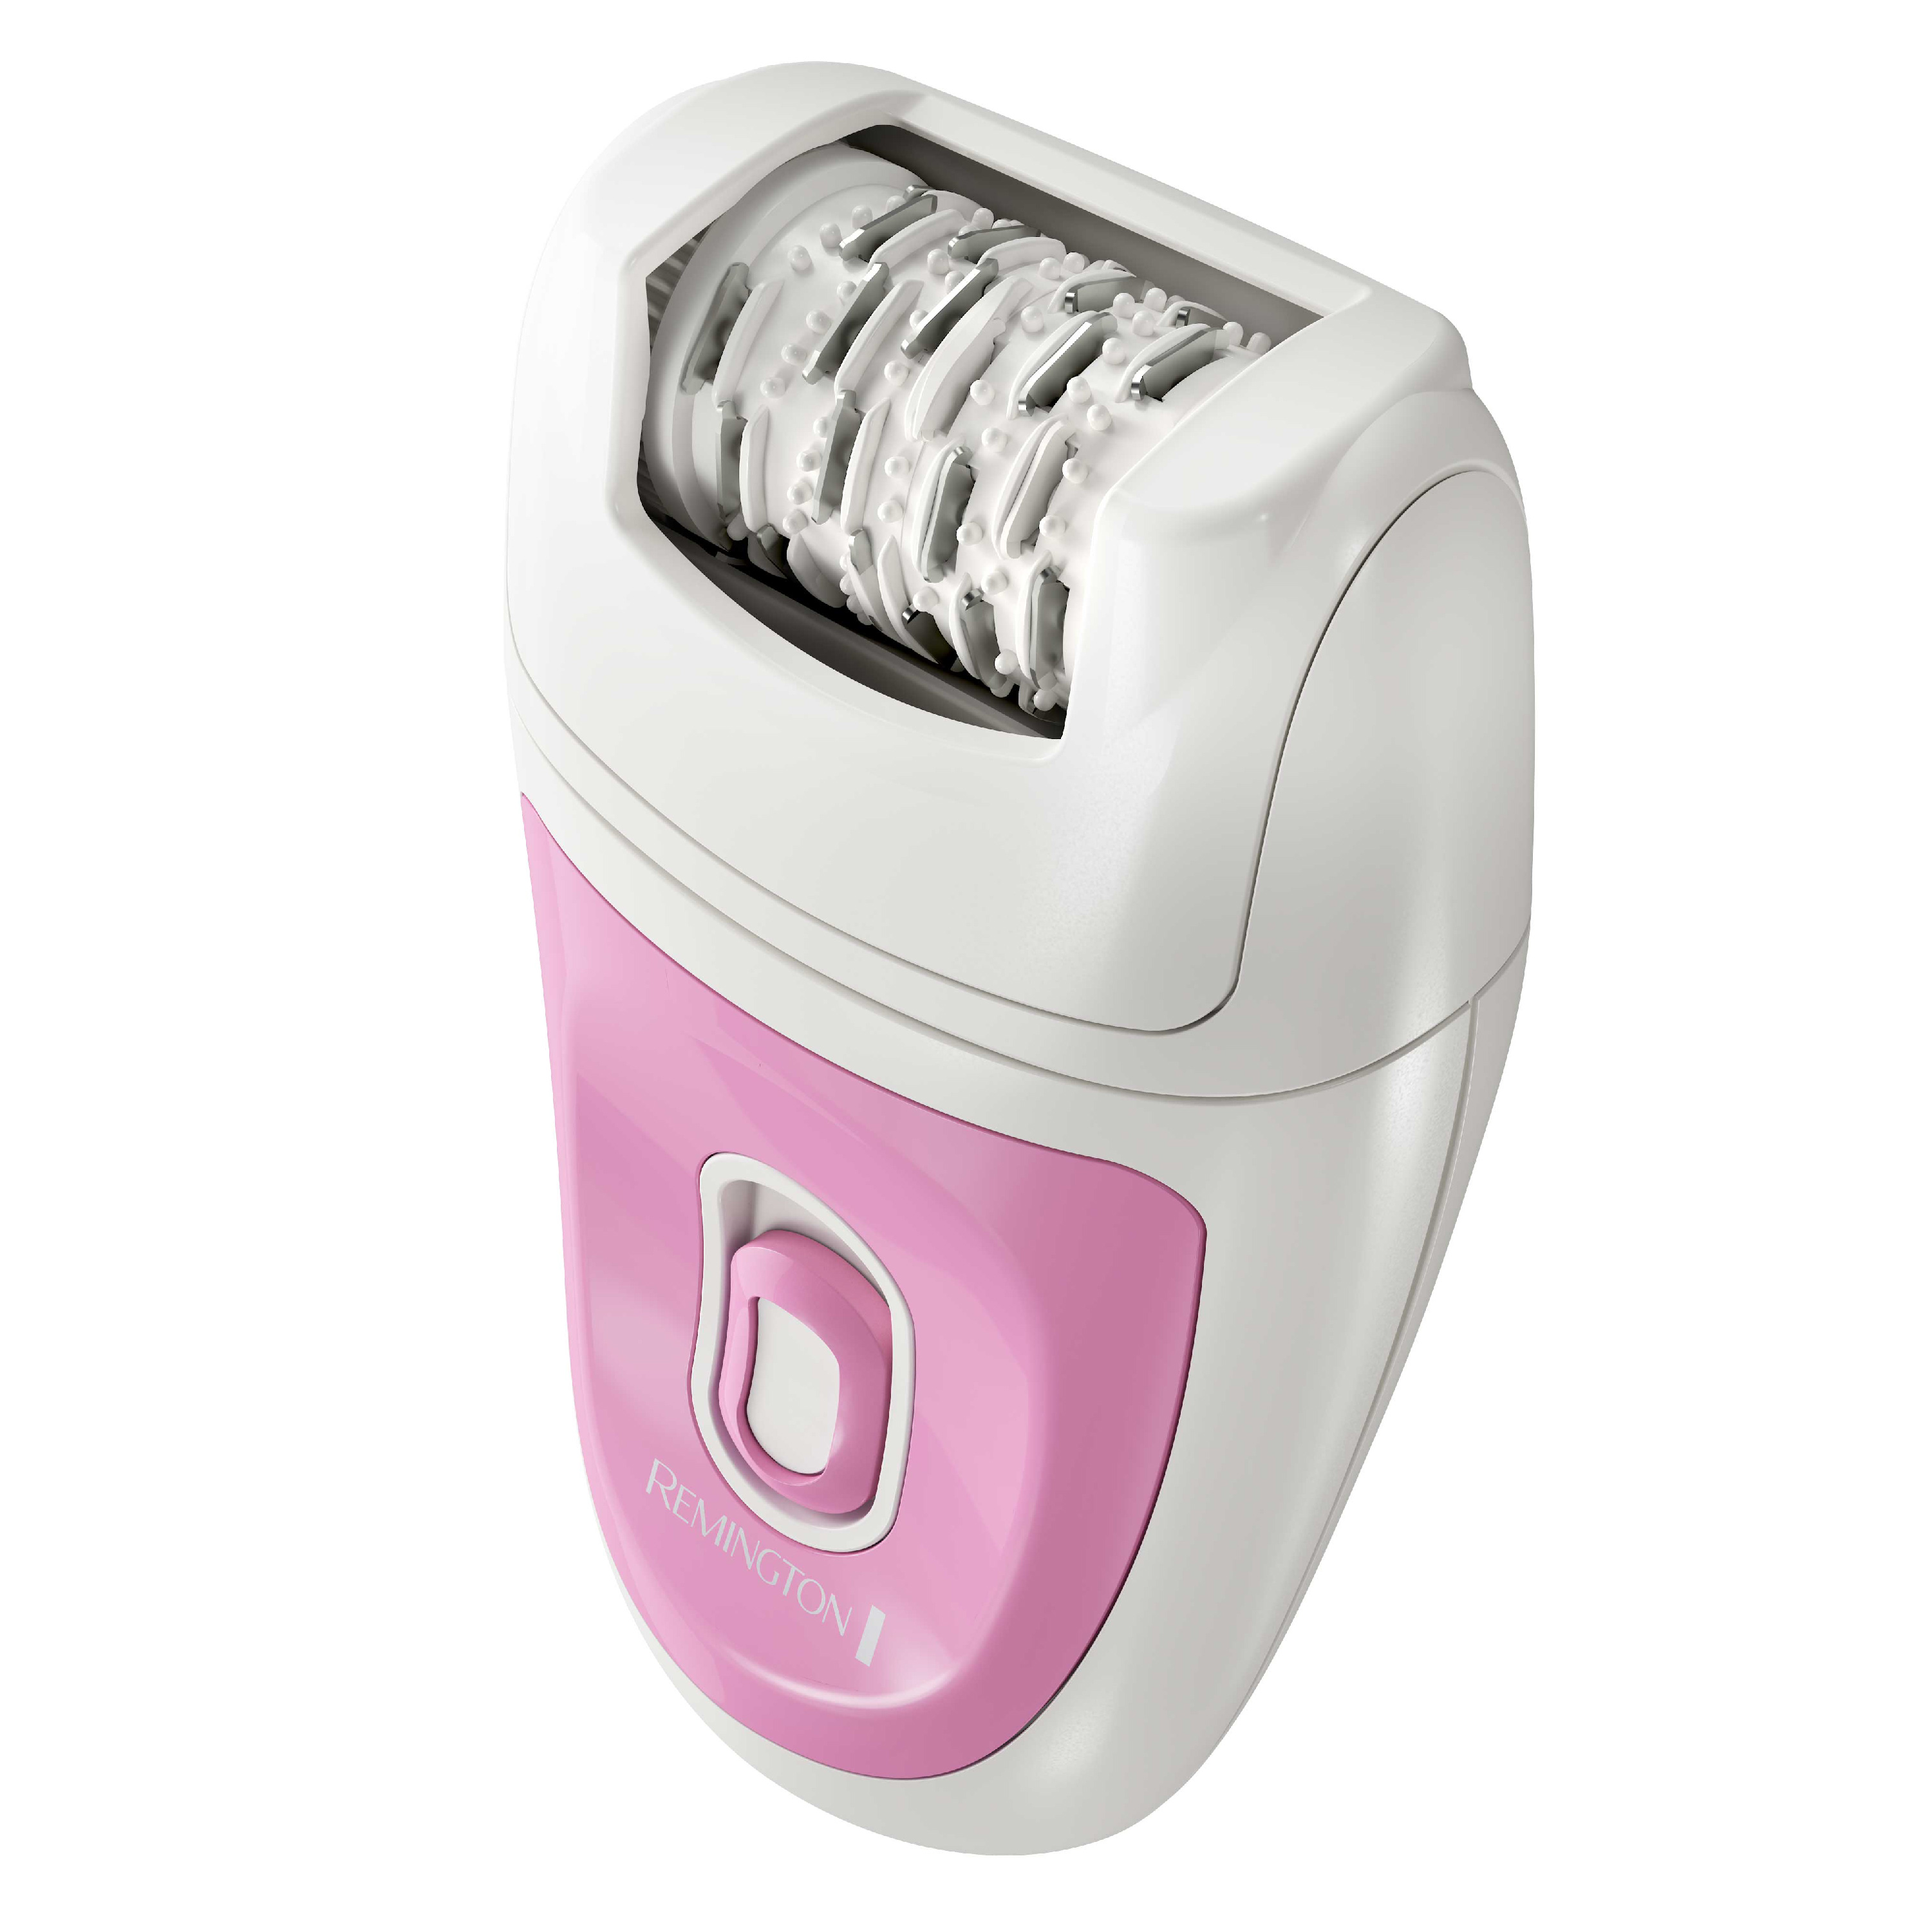 Remington Smooth & Silky Essential Epilator, Pink, EP7010F - image 1 of 3